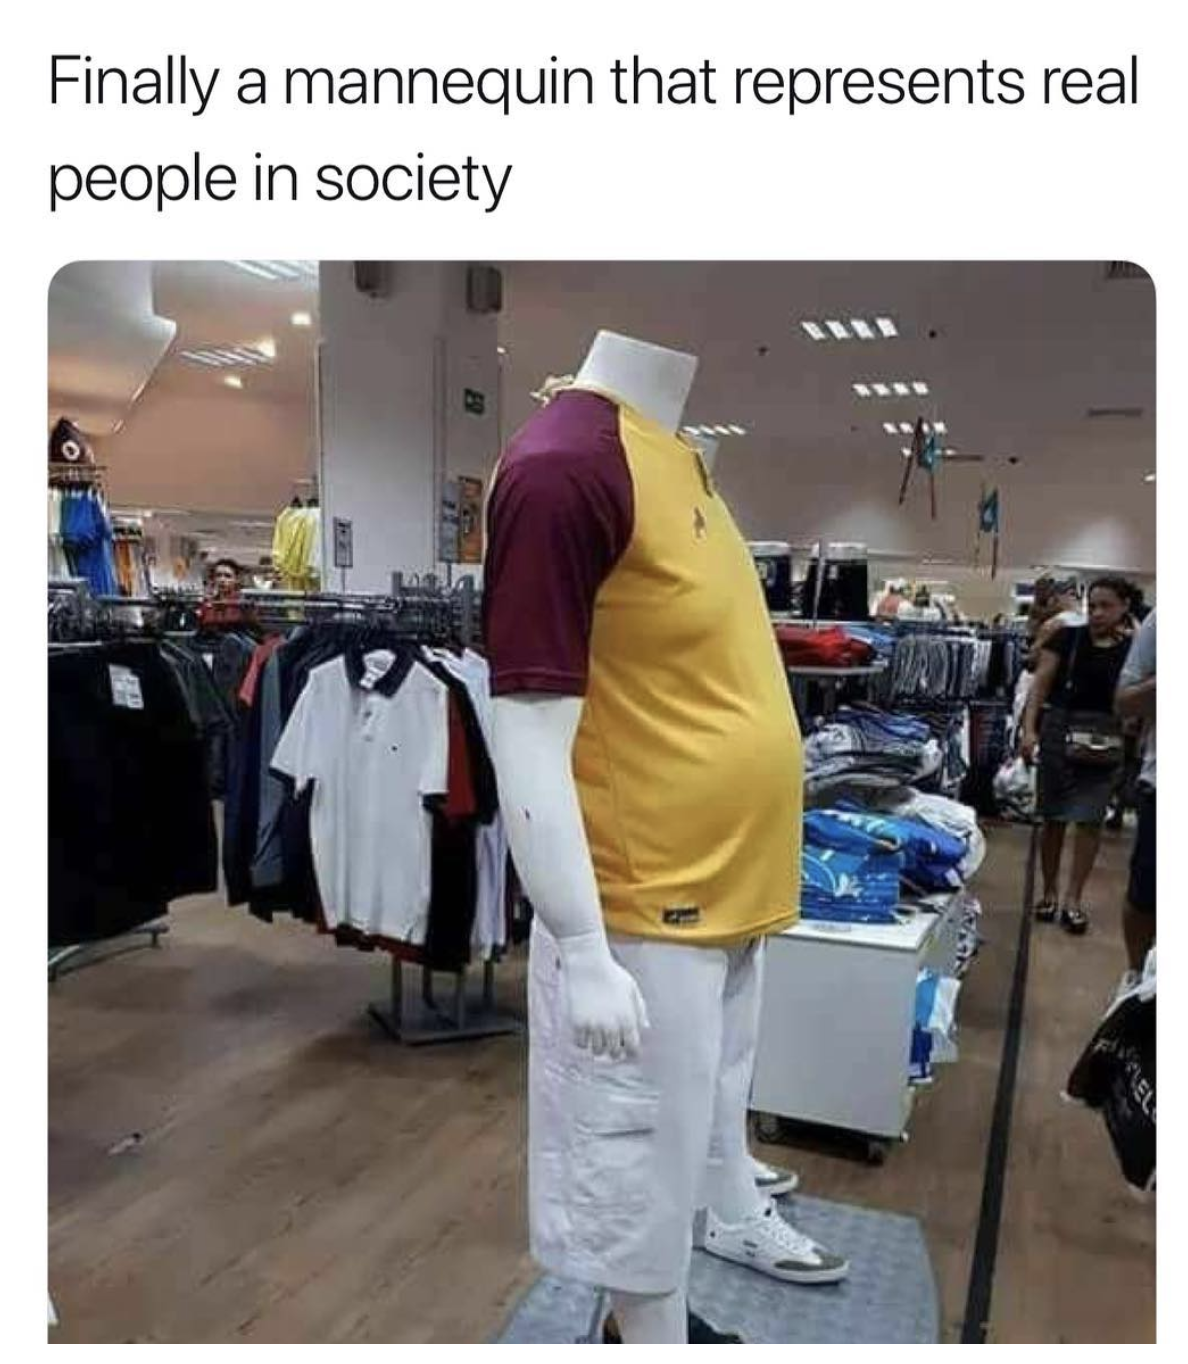 dad bod mannequin - Finally a mannequin that represents real people in society